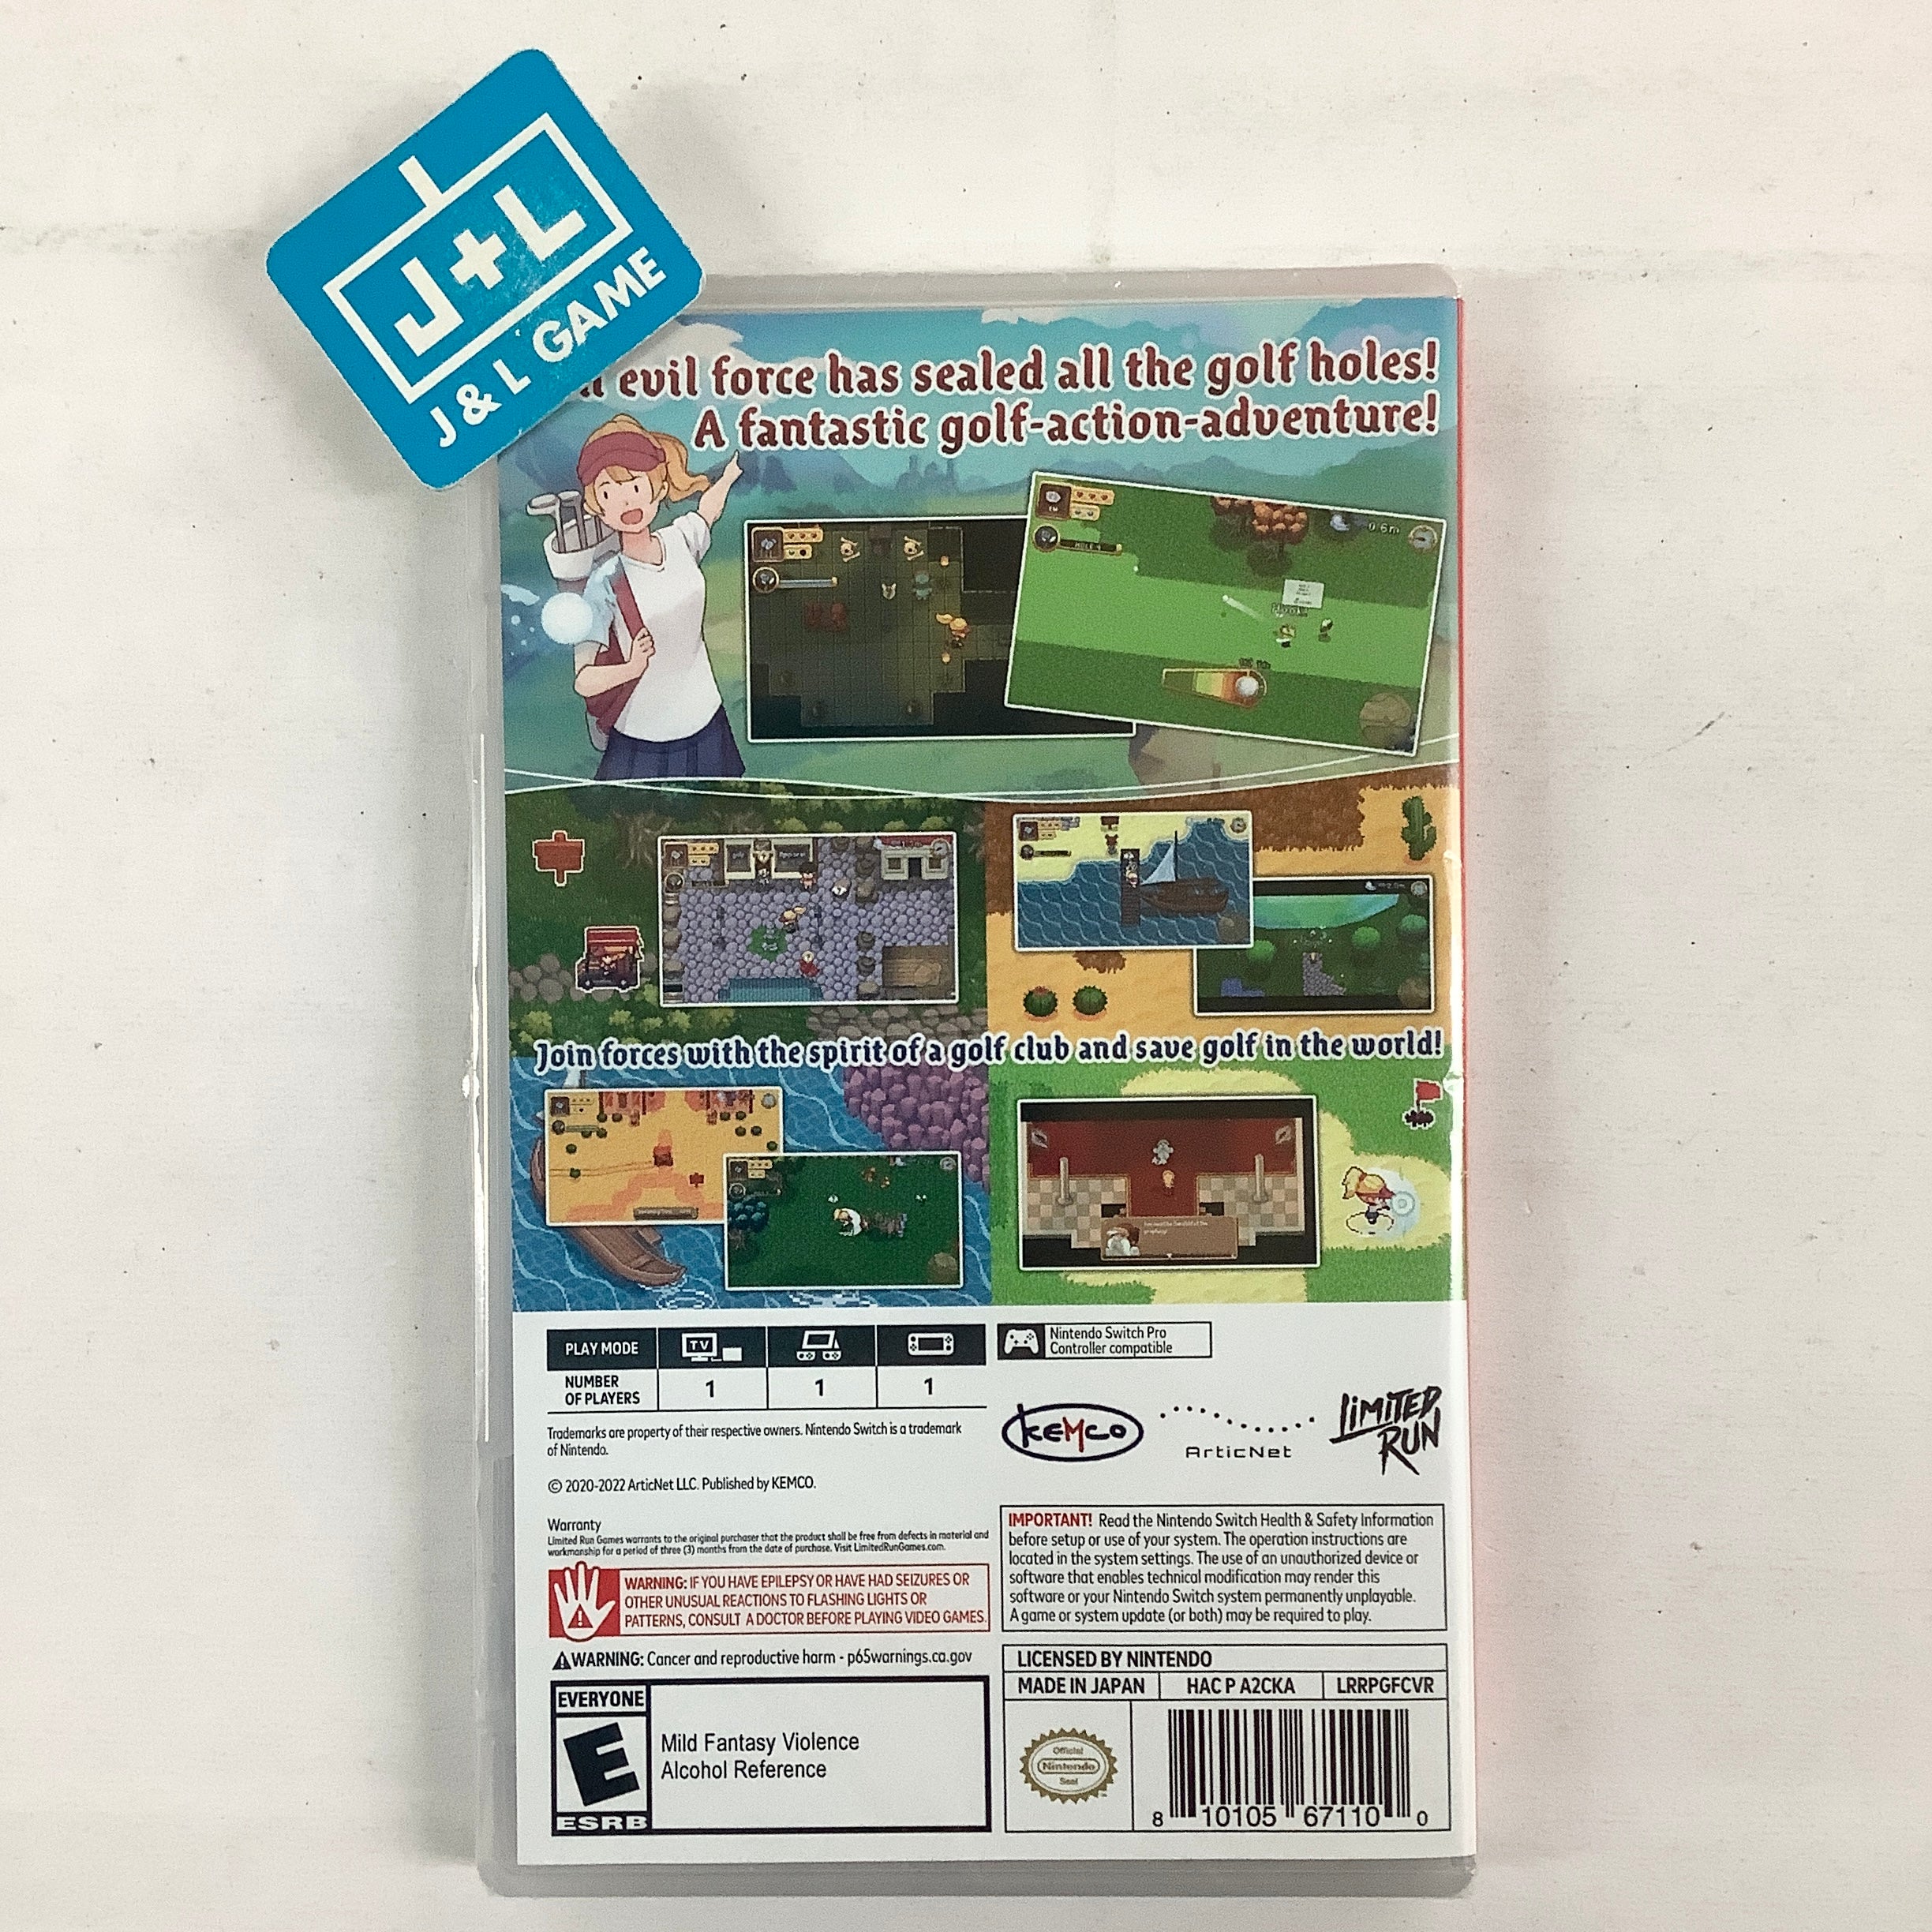 RPGolf Legends - (NSW) Nintendo Switch Video Games Limited Run Games   